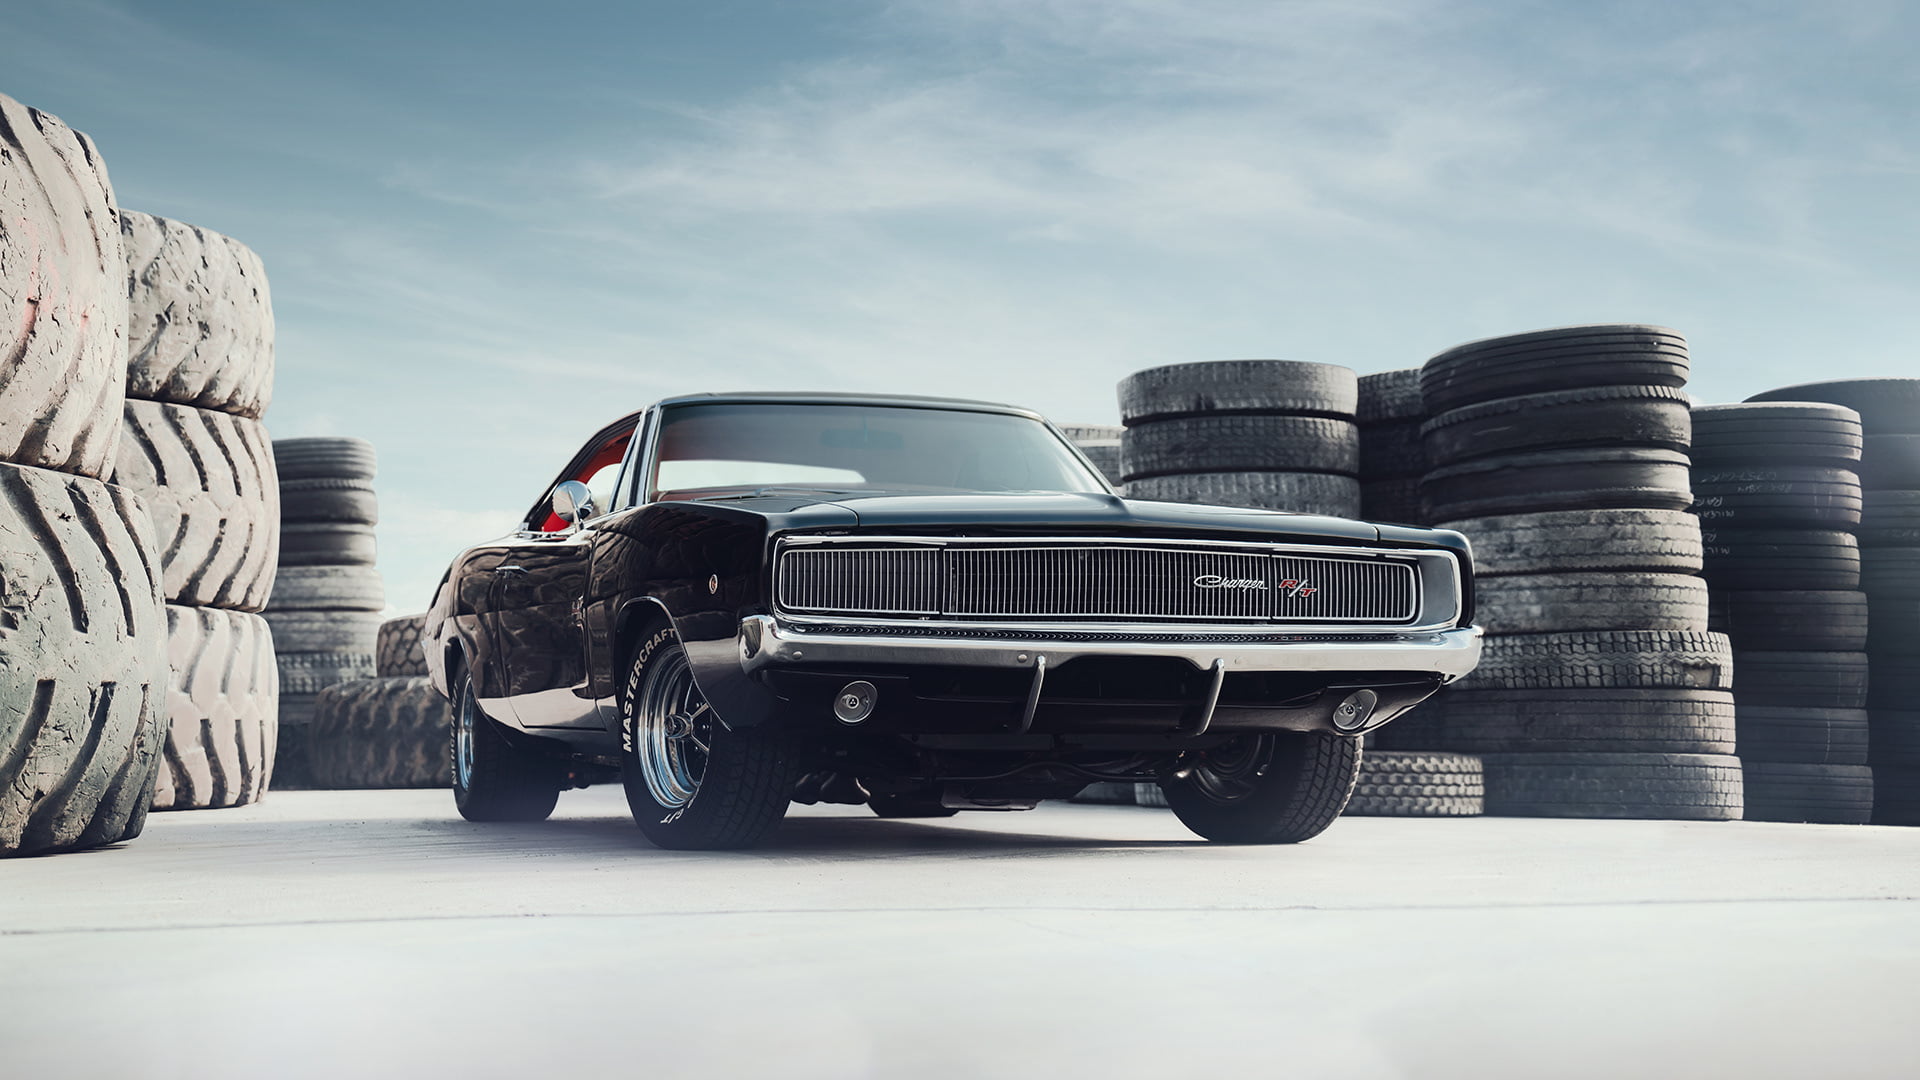 Charger RT, Dodge Charger R/T 1968, car, black cars, tires